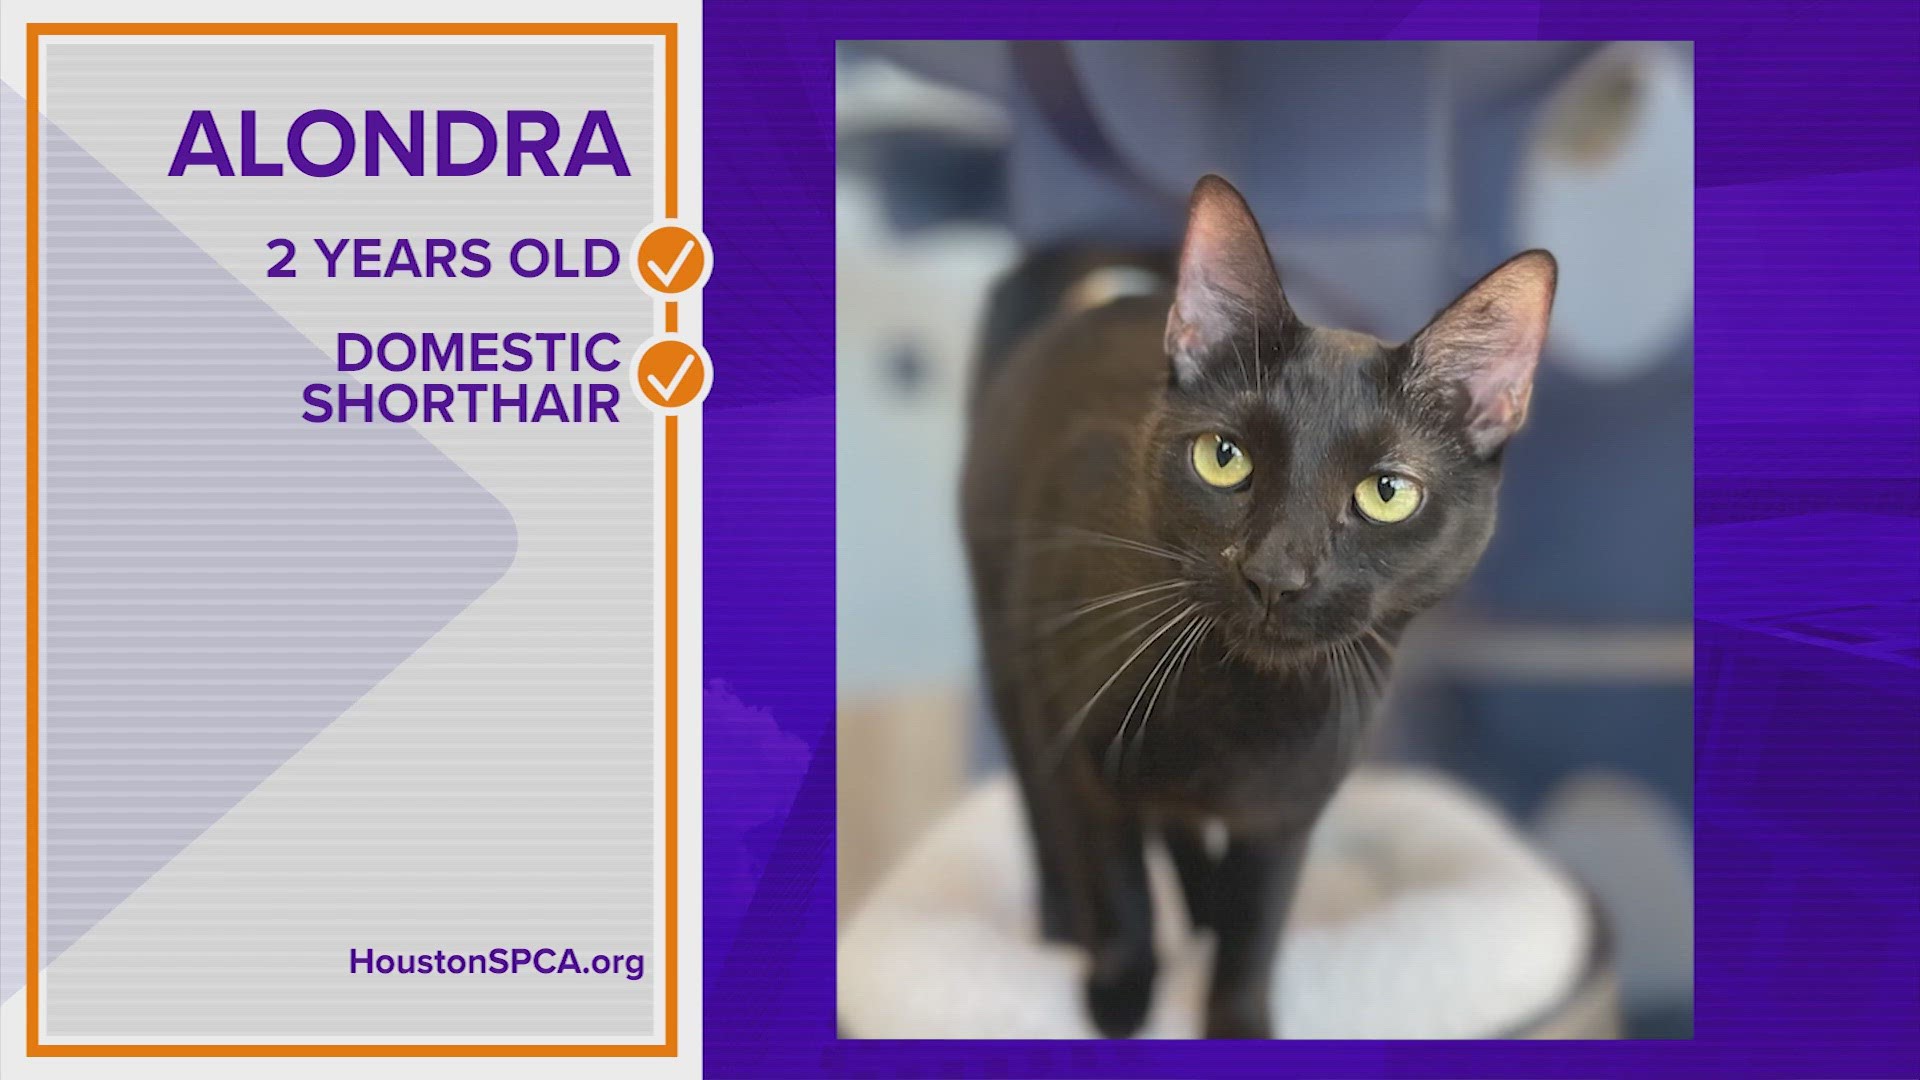 Alondra is a 2-year-old domestic short-hair cat who is charming and likes meeting new people.